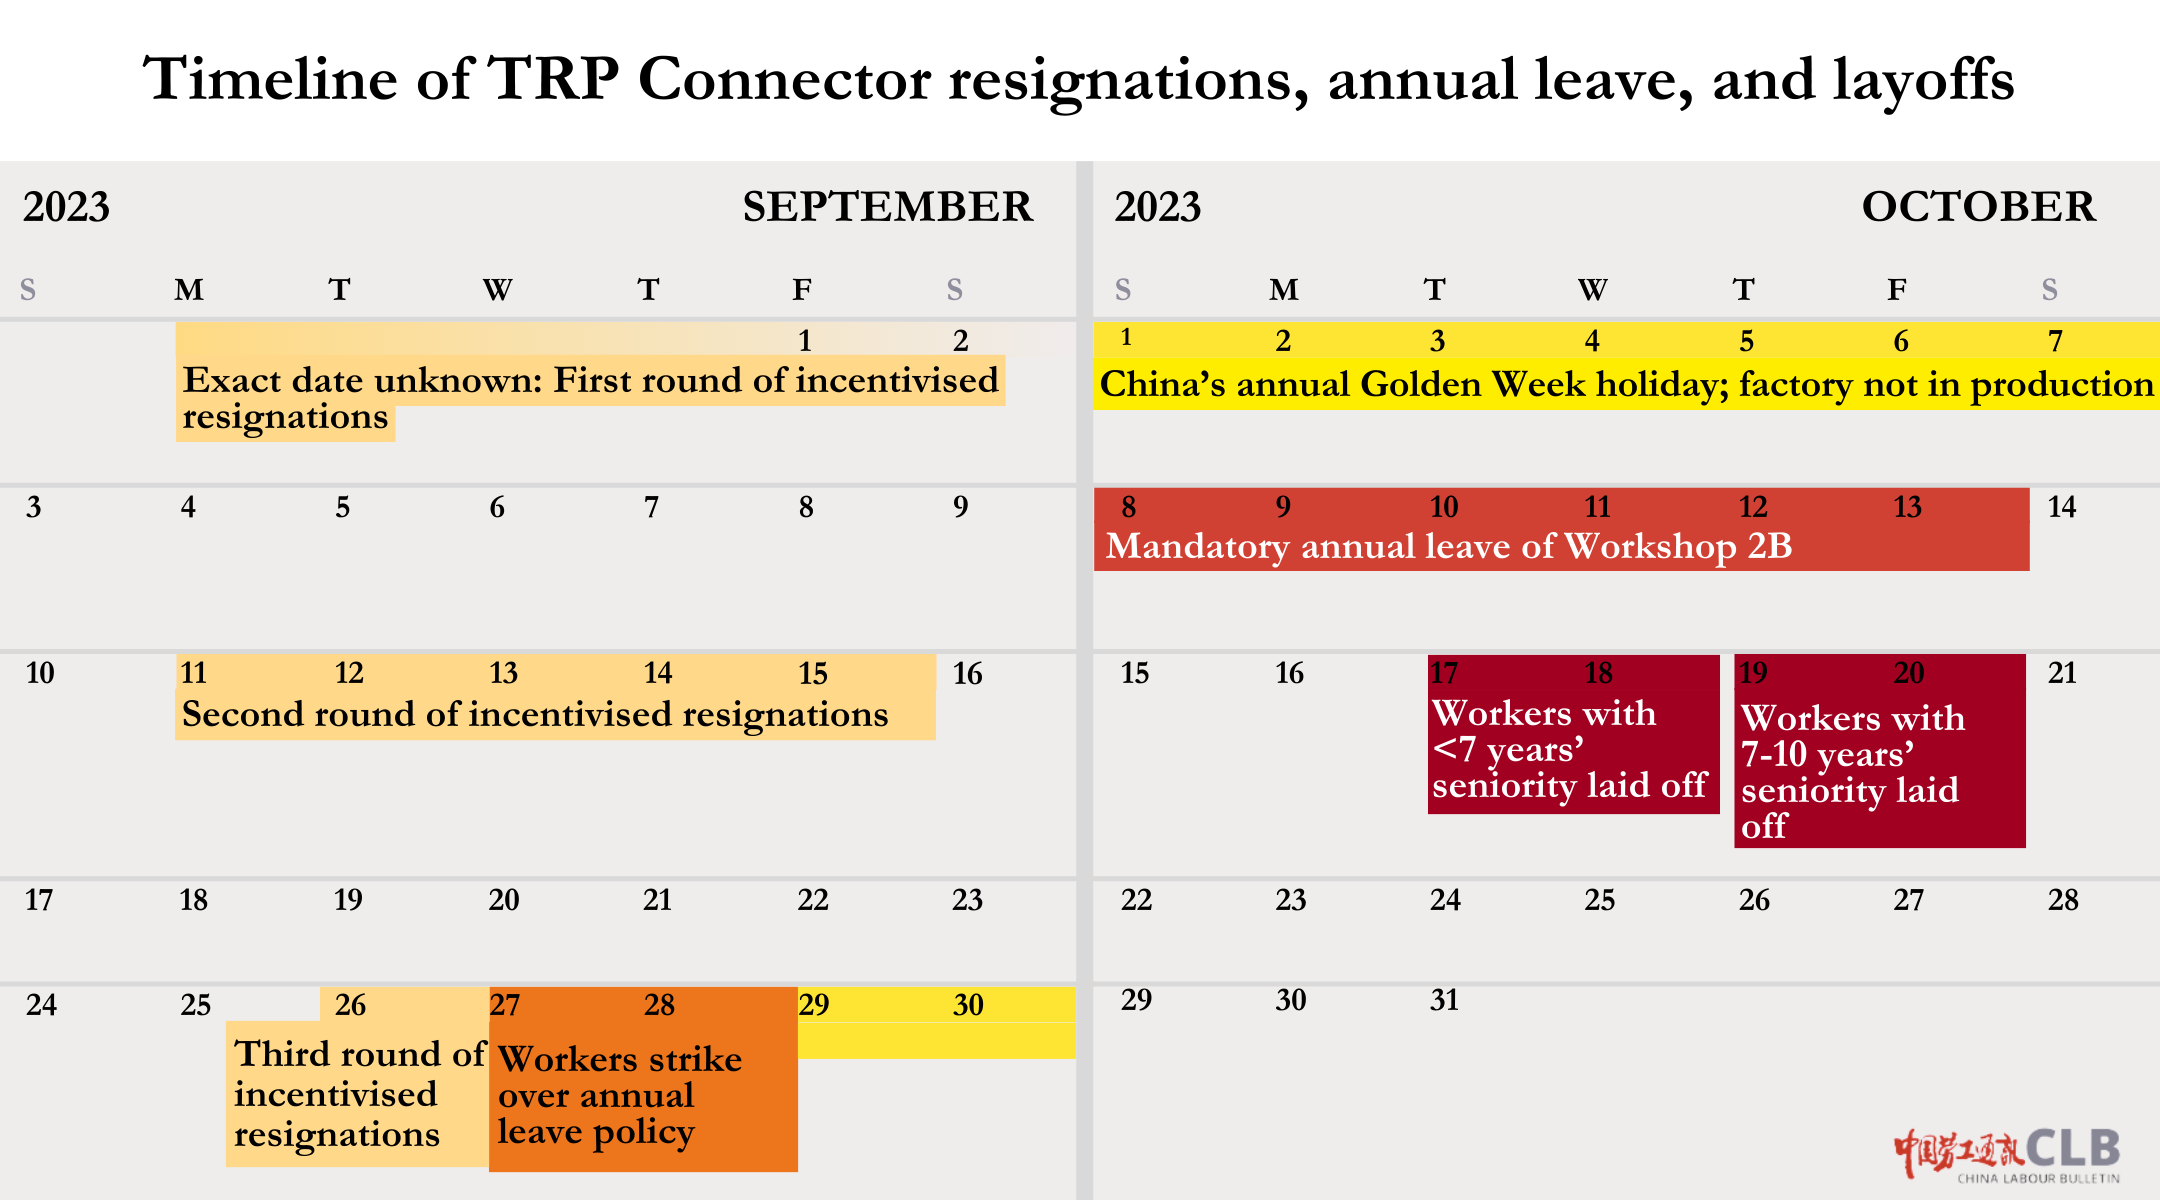 A CLB graphic shows the months of September and October 2023, highlighting the series of events affecting workers at TRP Connector